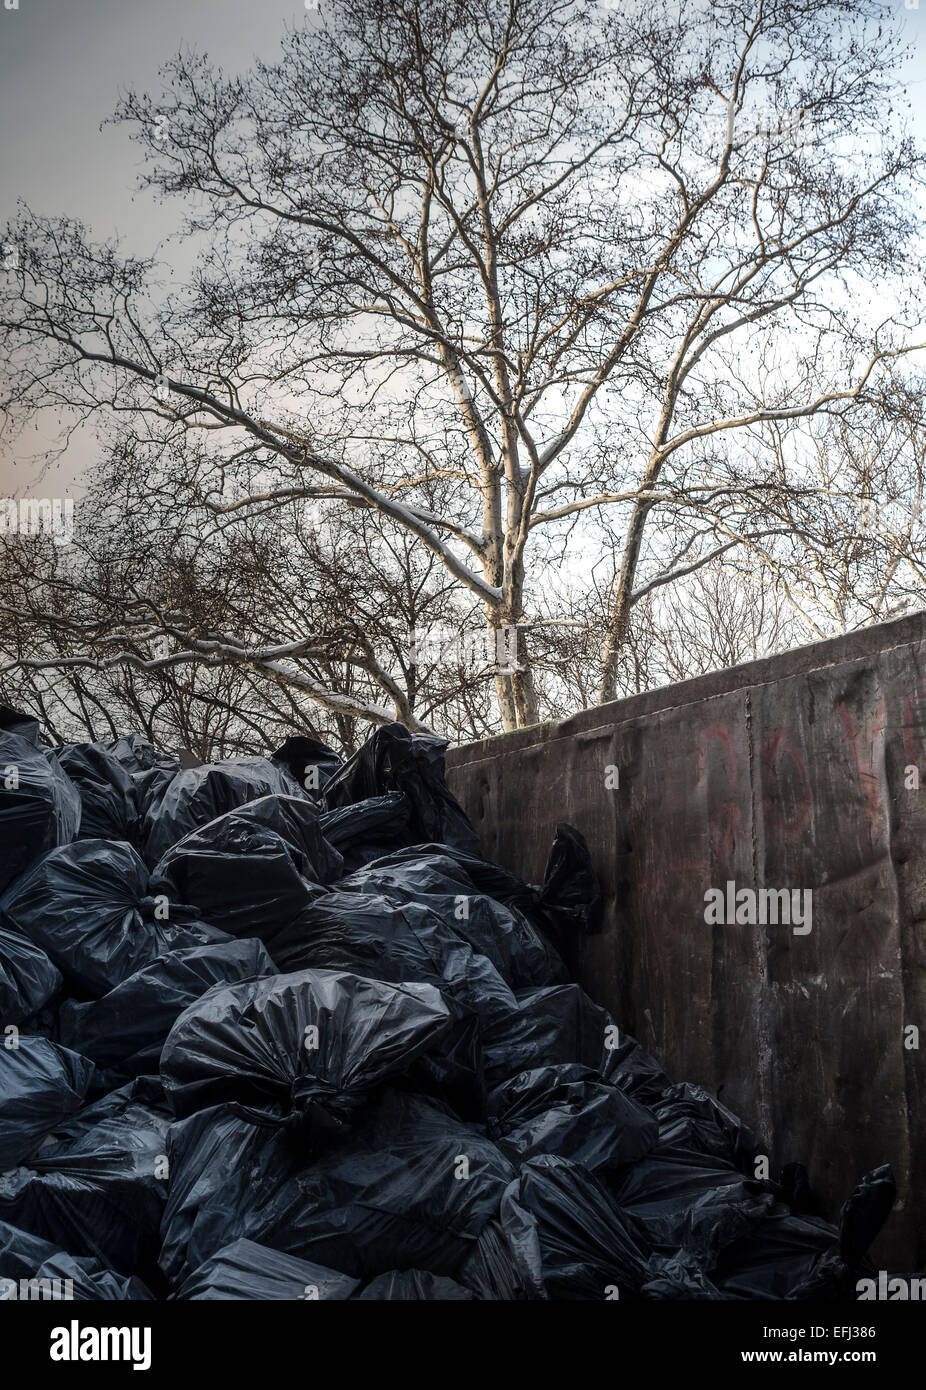 Big Metal Garbage Container for Waste Stock Photo - Image of environmental,  discard: 221051338